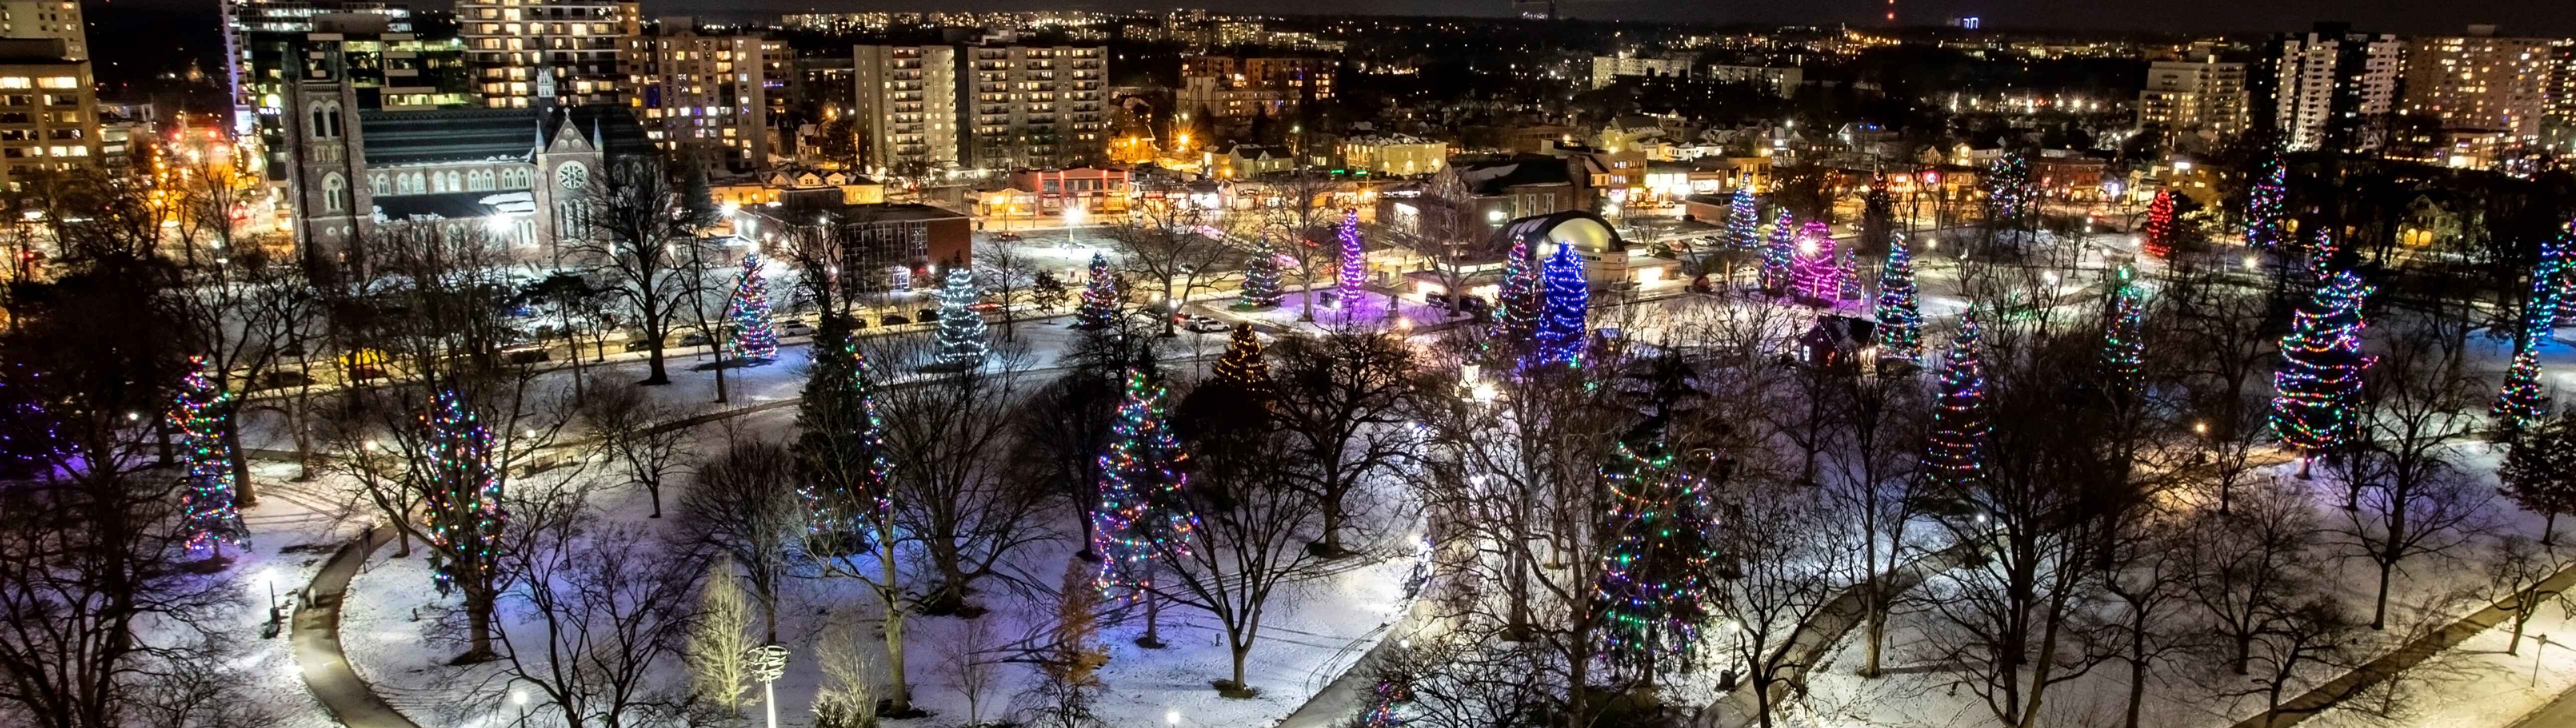 Lighting of the Lights 2020 full picture of VictoriaPark